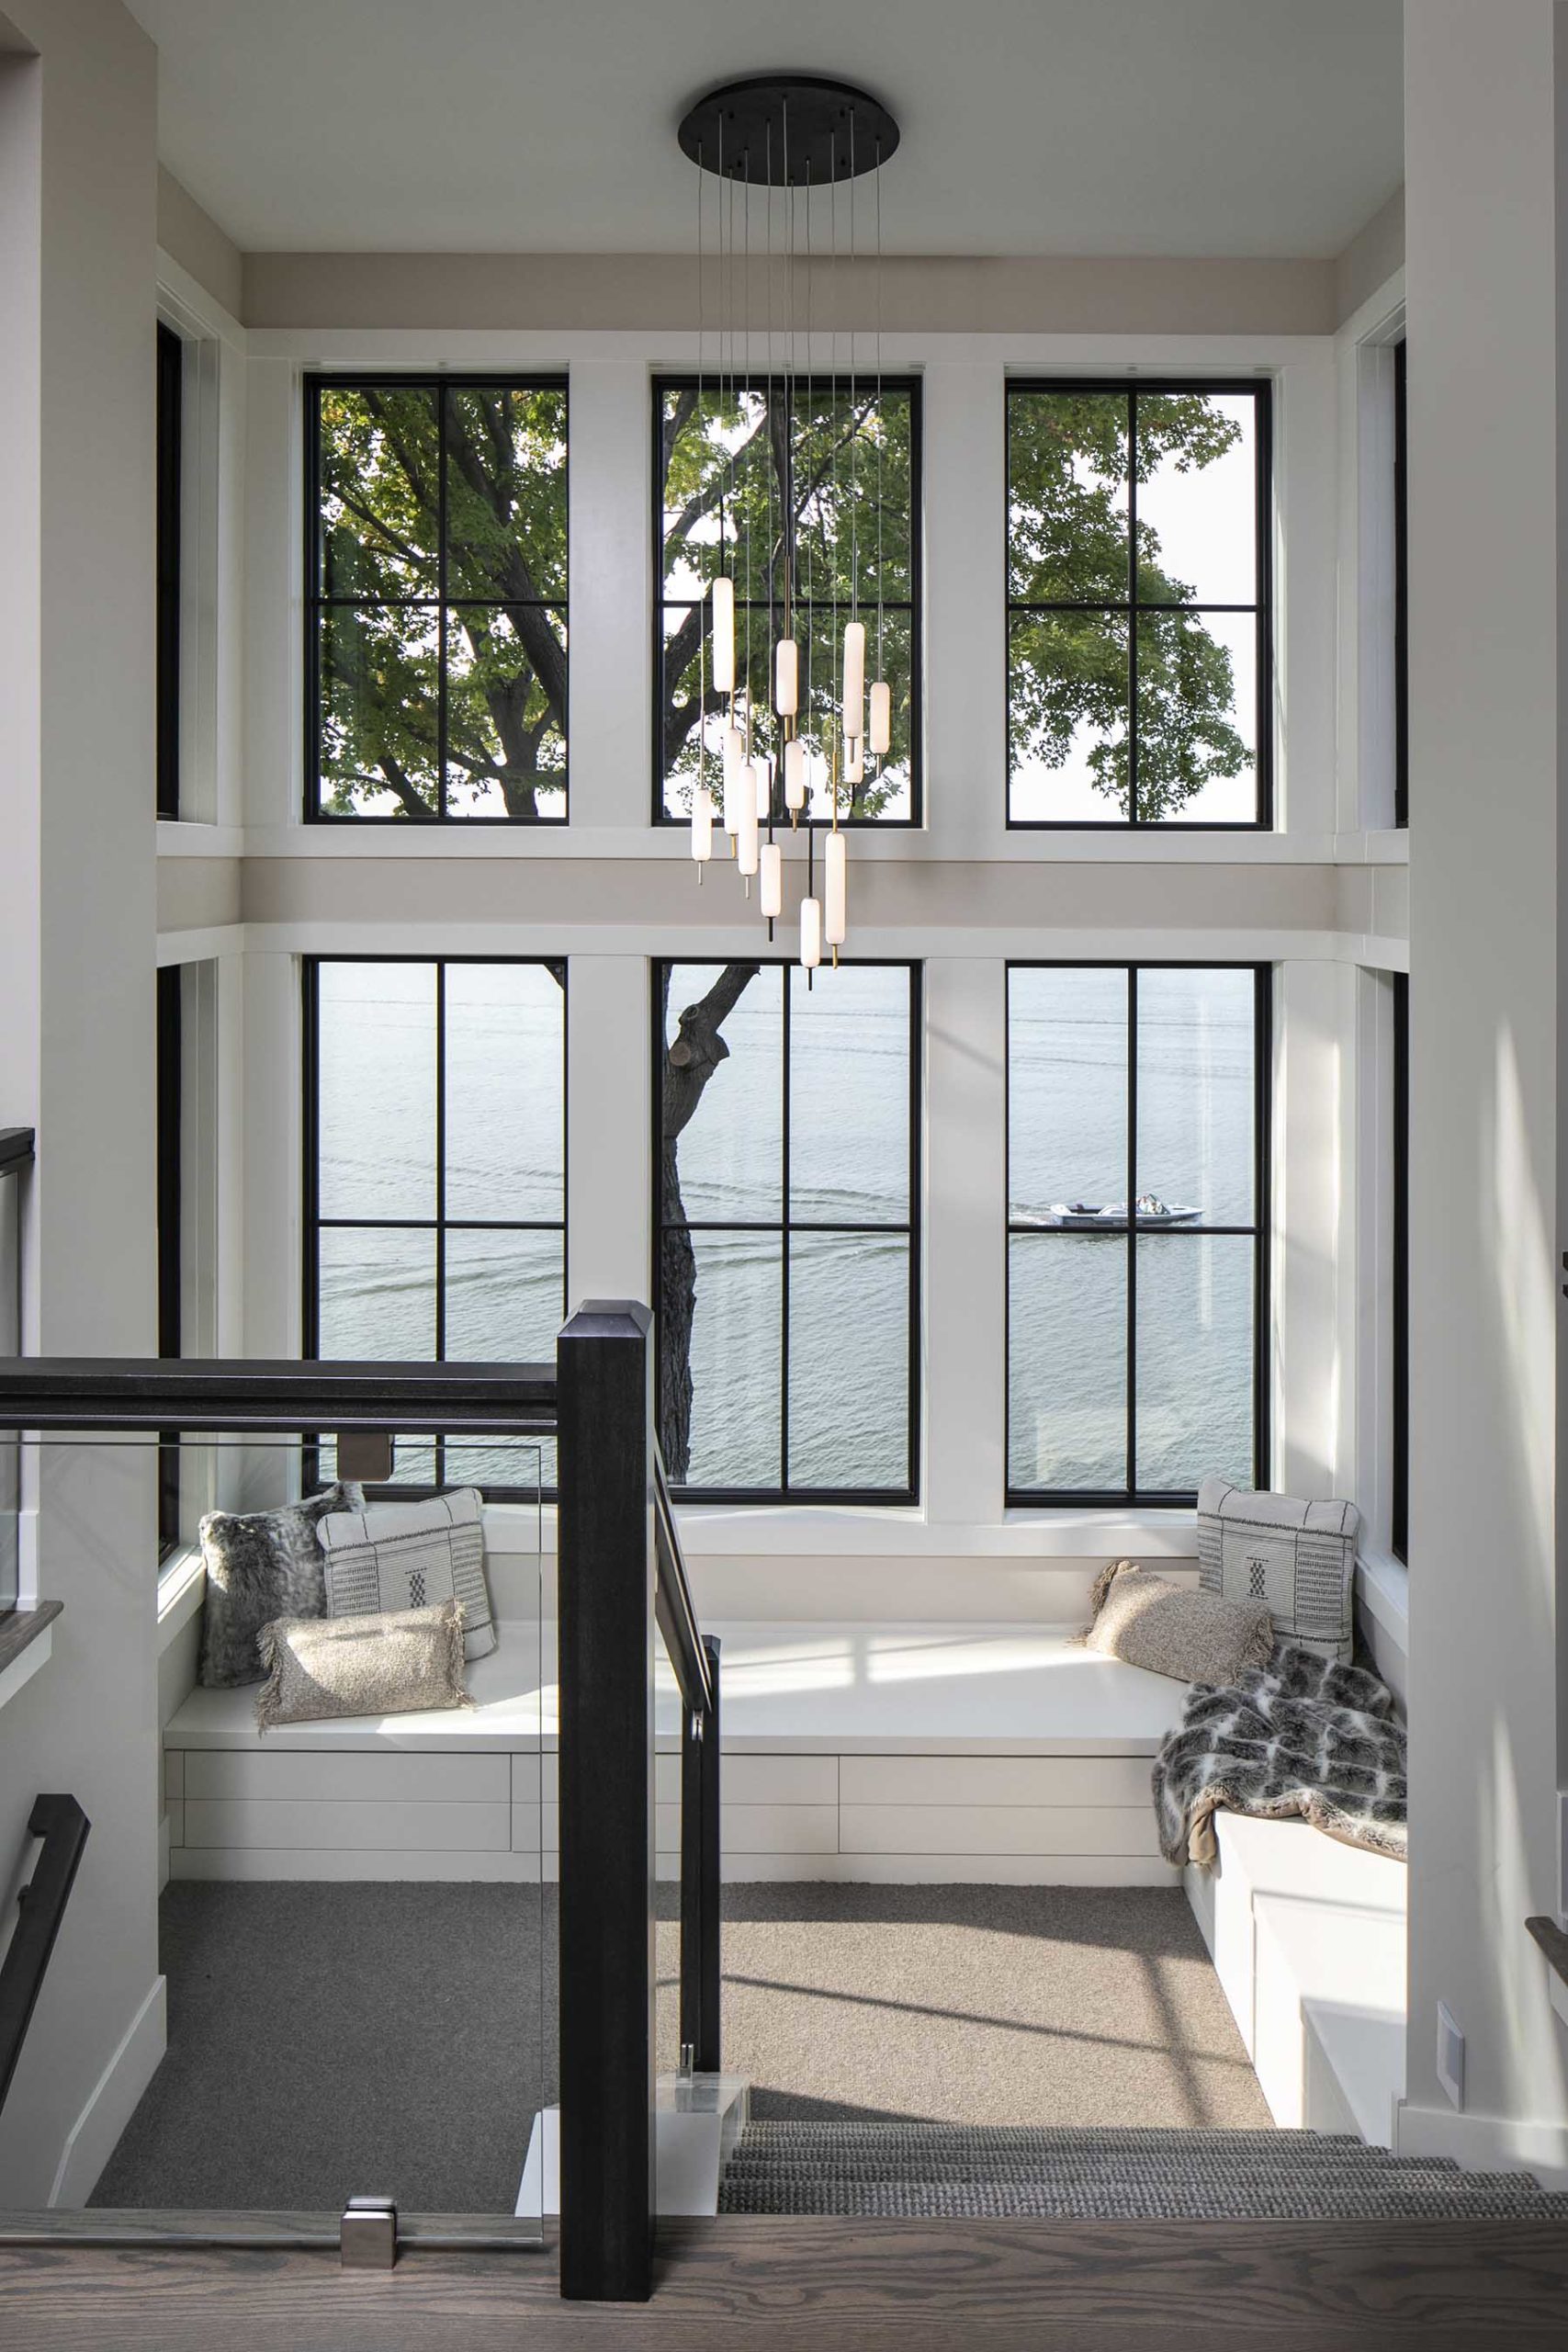 A living room with large windows overlooking the water.